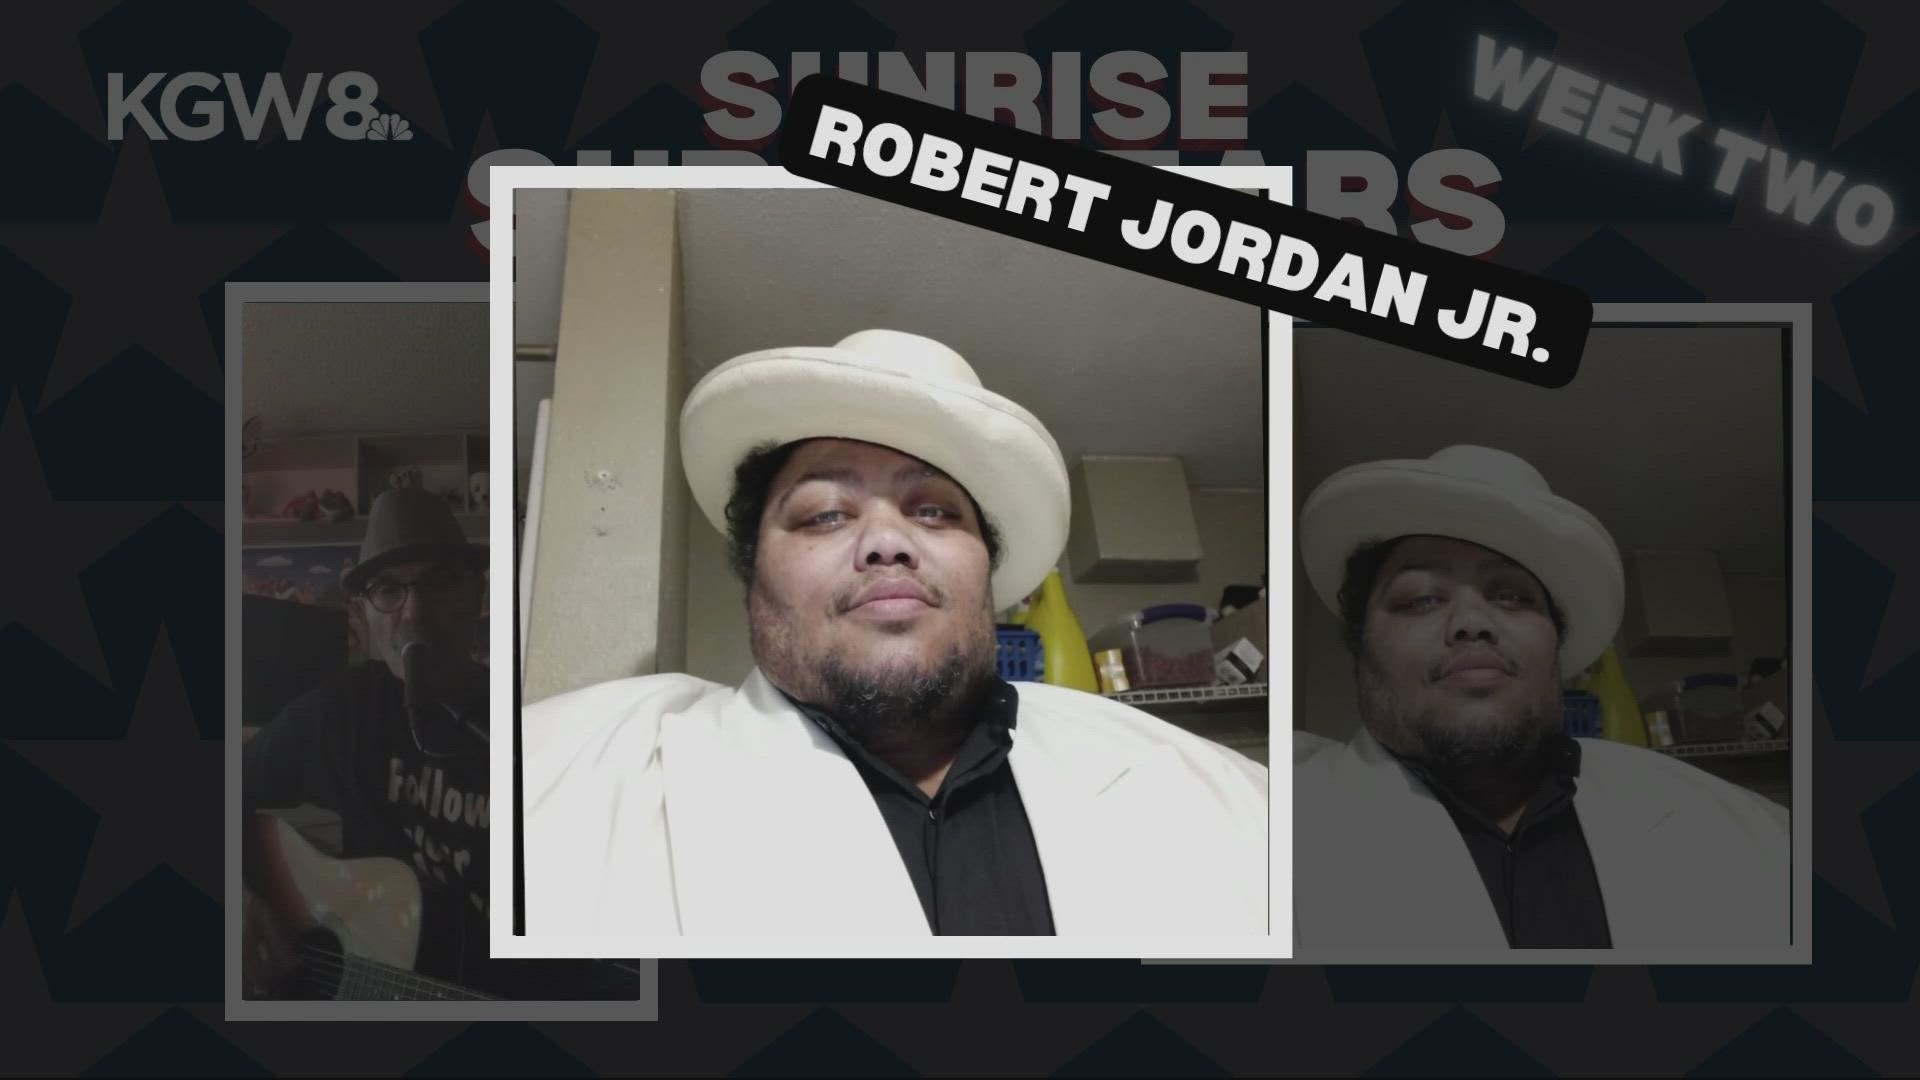 Singer Robert Jordon has the chance to compete for the grand finale prize of performing on KGW News at Sunrise.